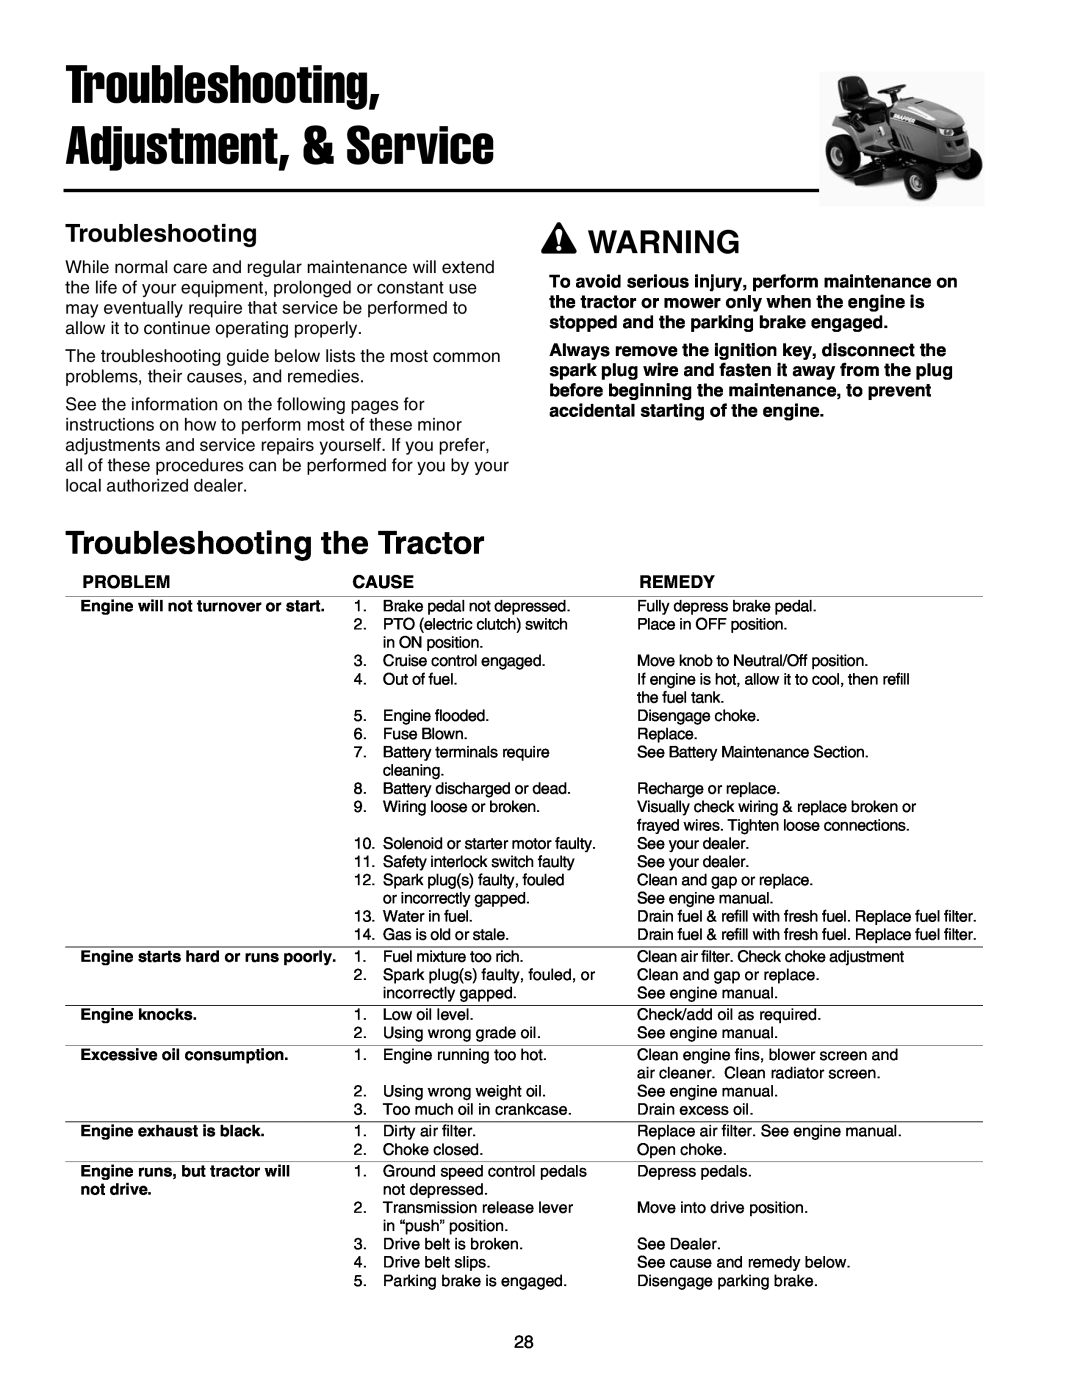 Snapper LT-200 Series manual Troubleshooting Adjustment, & Service, Troubleshooting the Tractor 